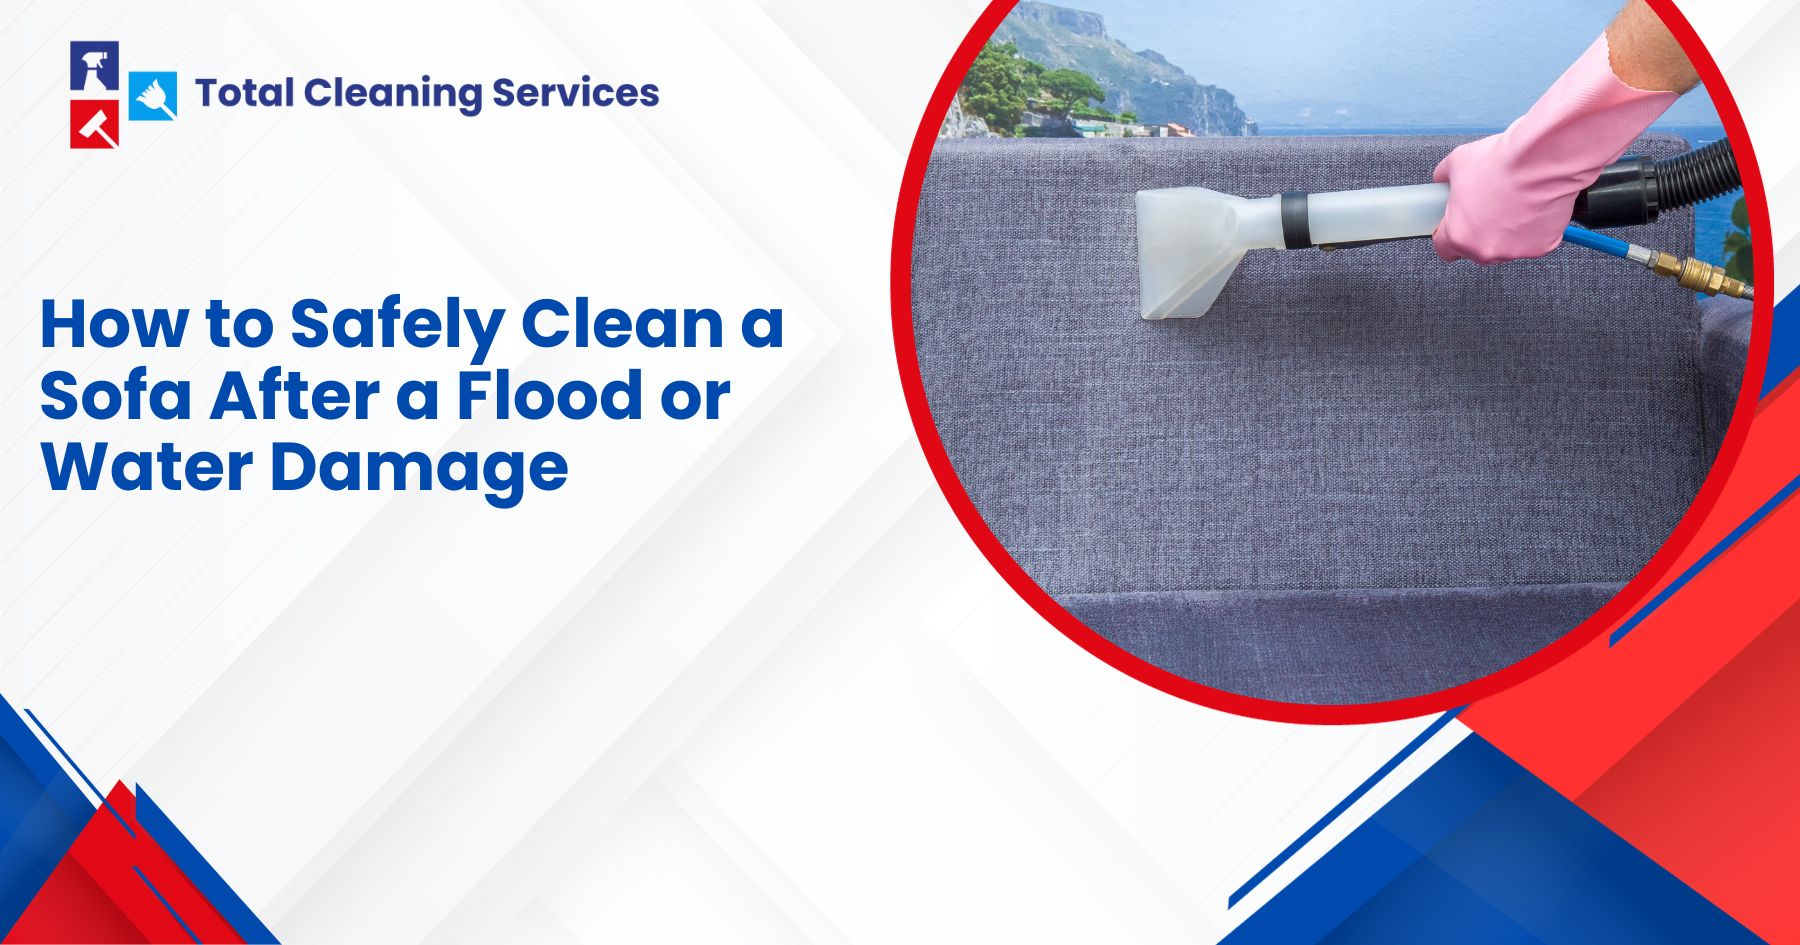 How to Safely Clean a Sofa After a Flood or Water Damage